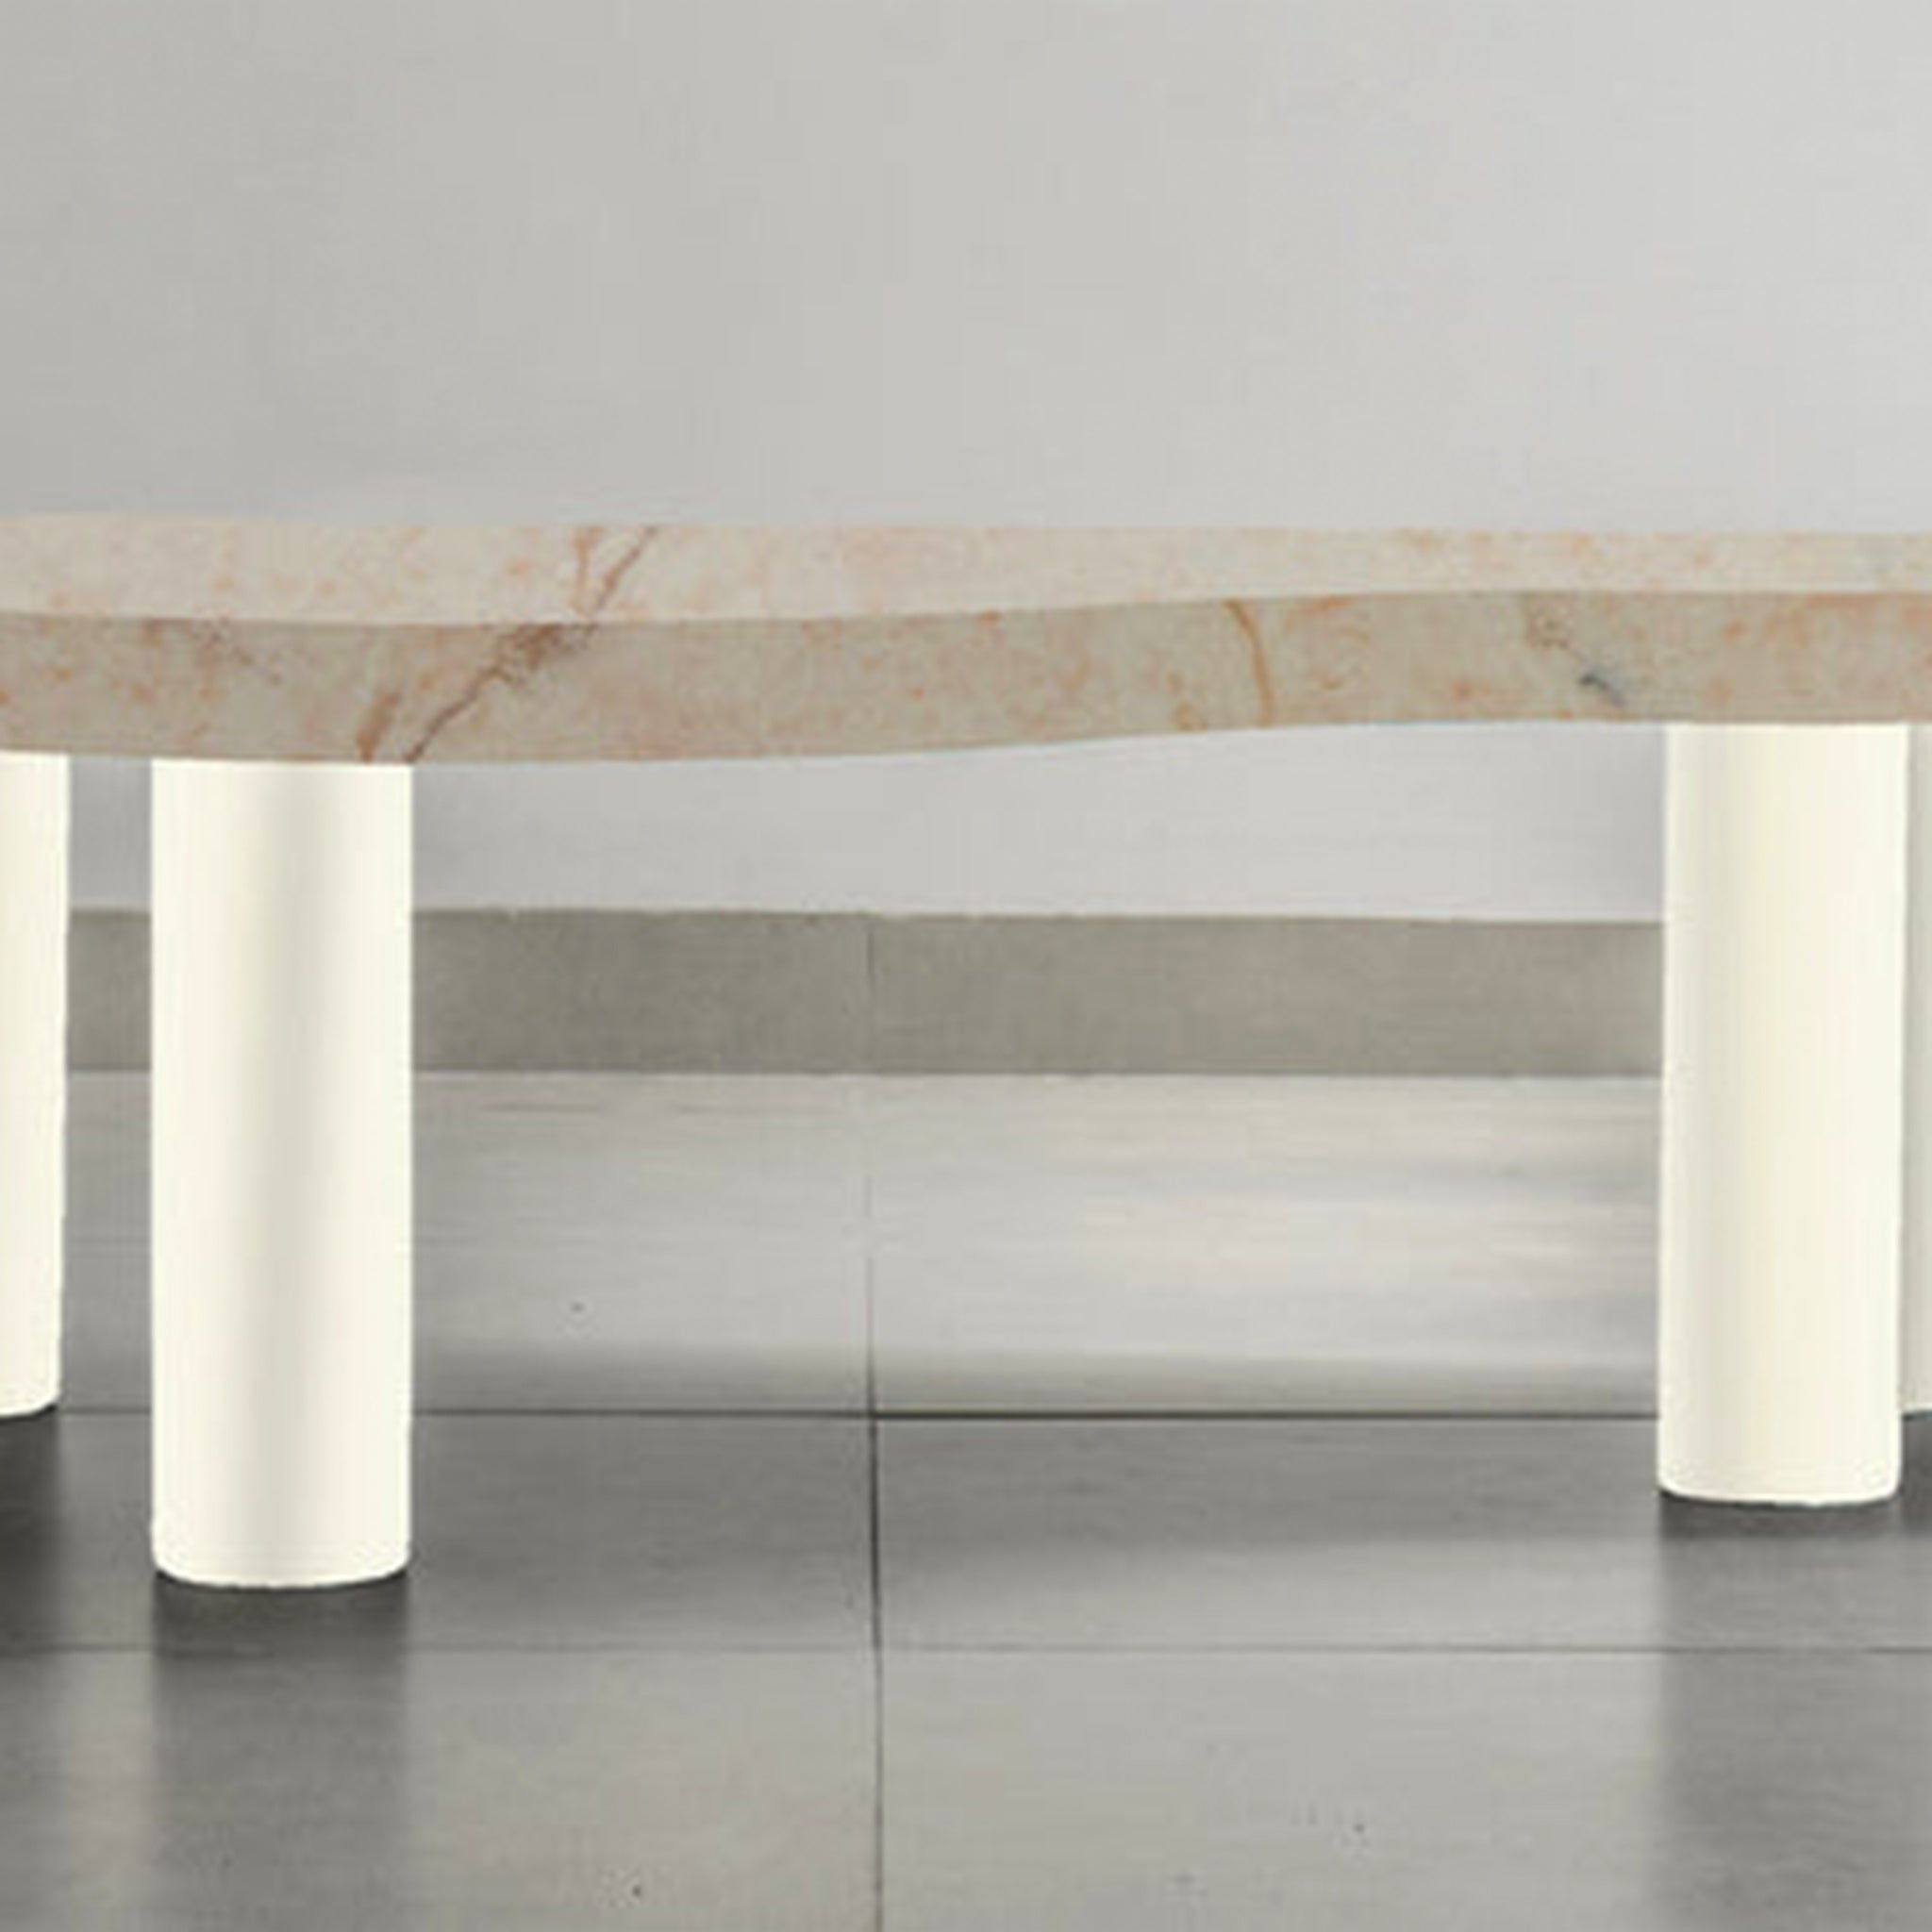 Large Coffee Table: 130cm x 80cm size offers ample surface space.